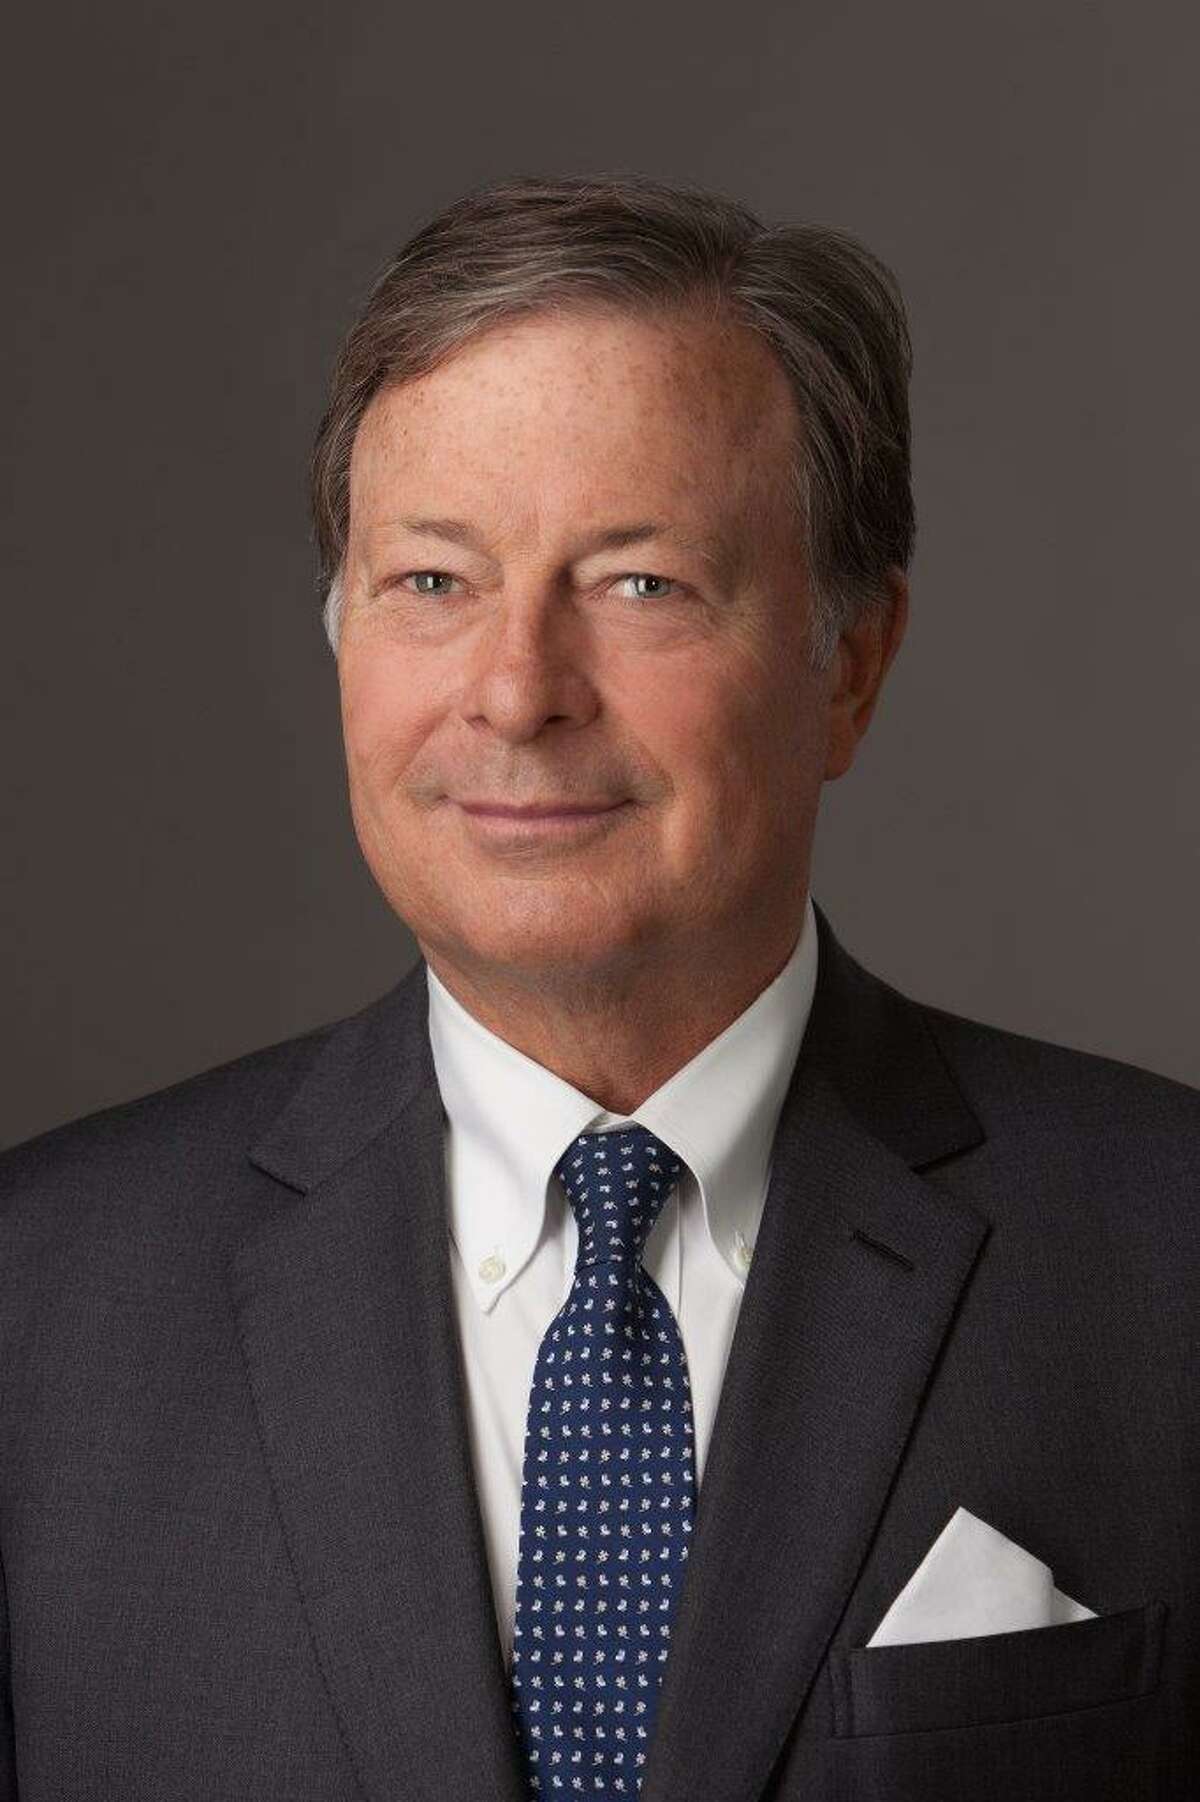 Thomas L. Carter, Jr. President, Chief Executive Officer, and Chairman Black Stone Minerals, L.P. Base Salary $669,500 Bonus $0 Stock awards $5,398,966 Stock options $0 Total compensation $9,735,161